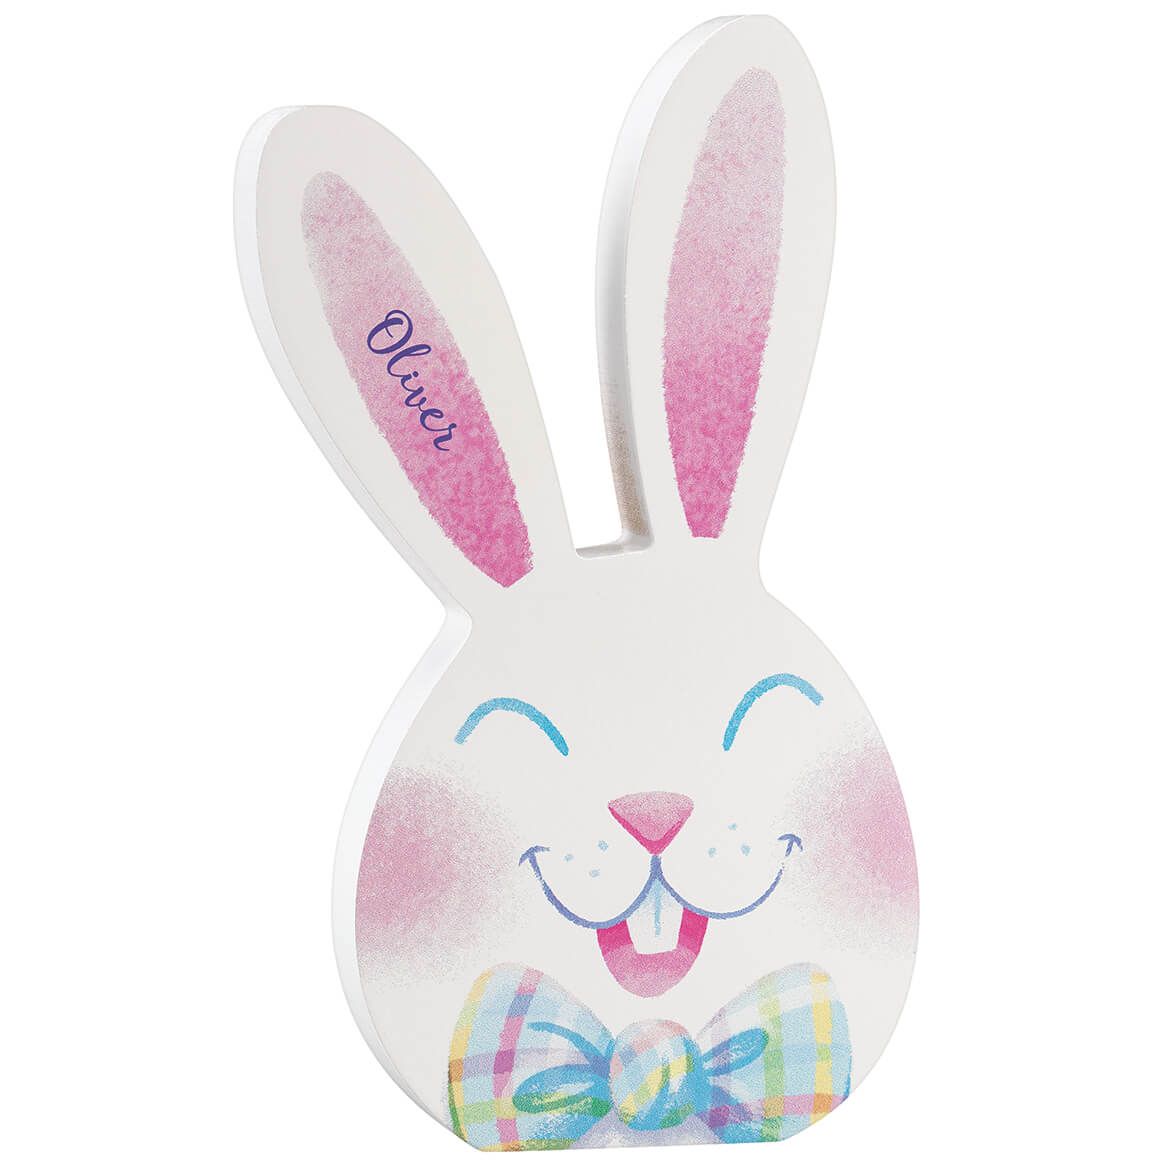 Personalized Easter Bunny with Bow Tie by Holiday Peak™ + '-' + 374550